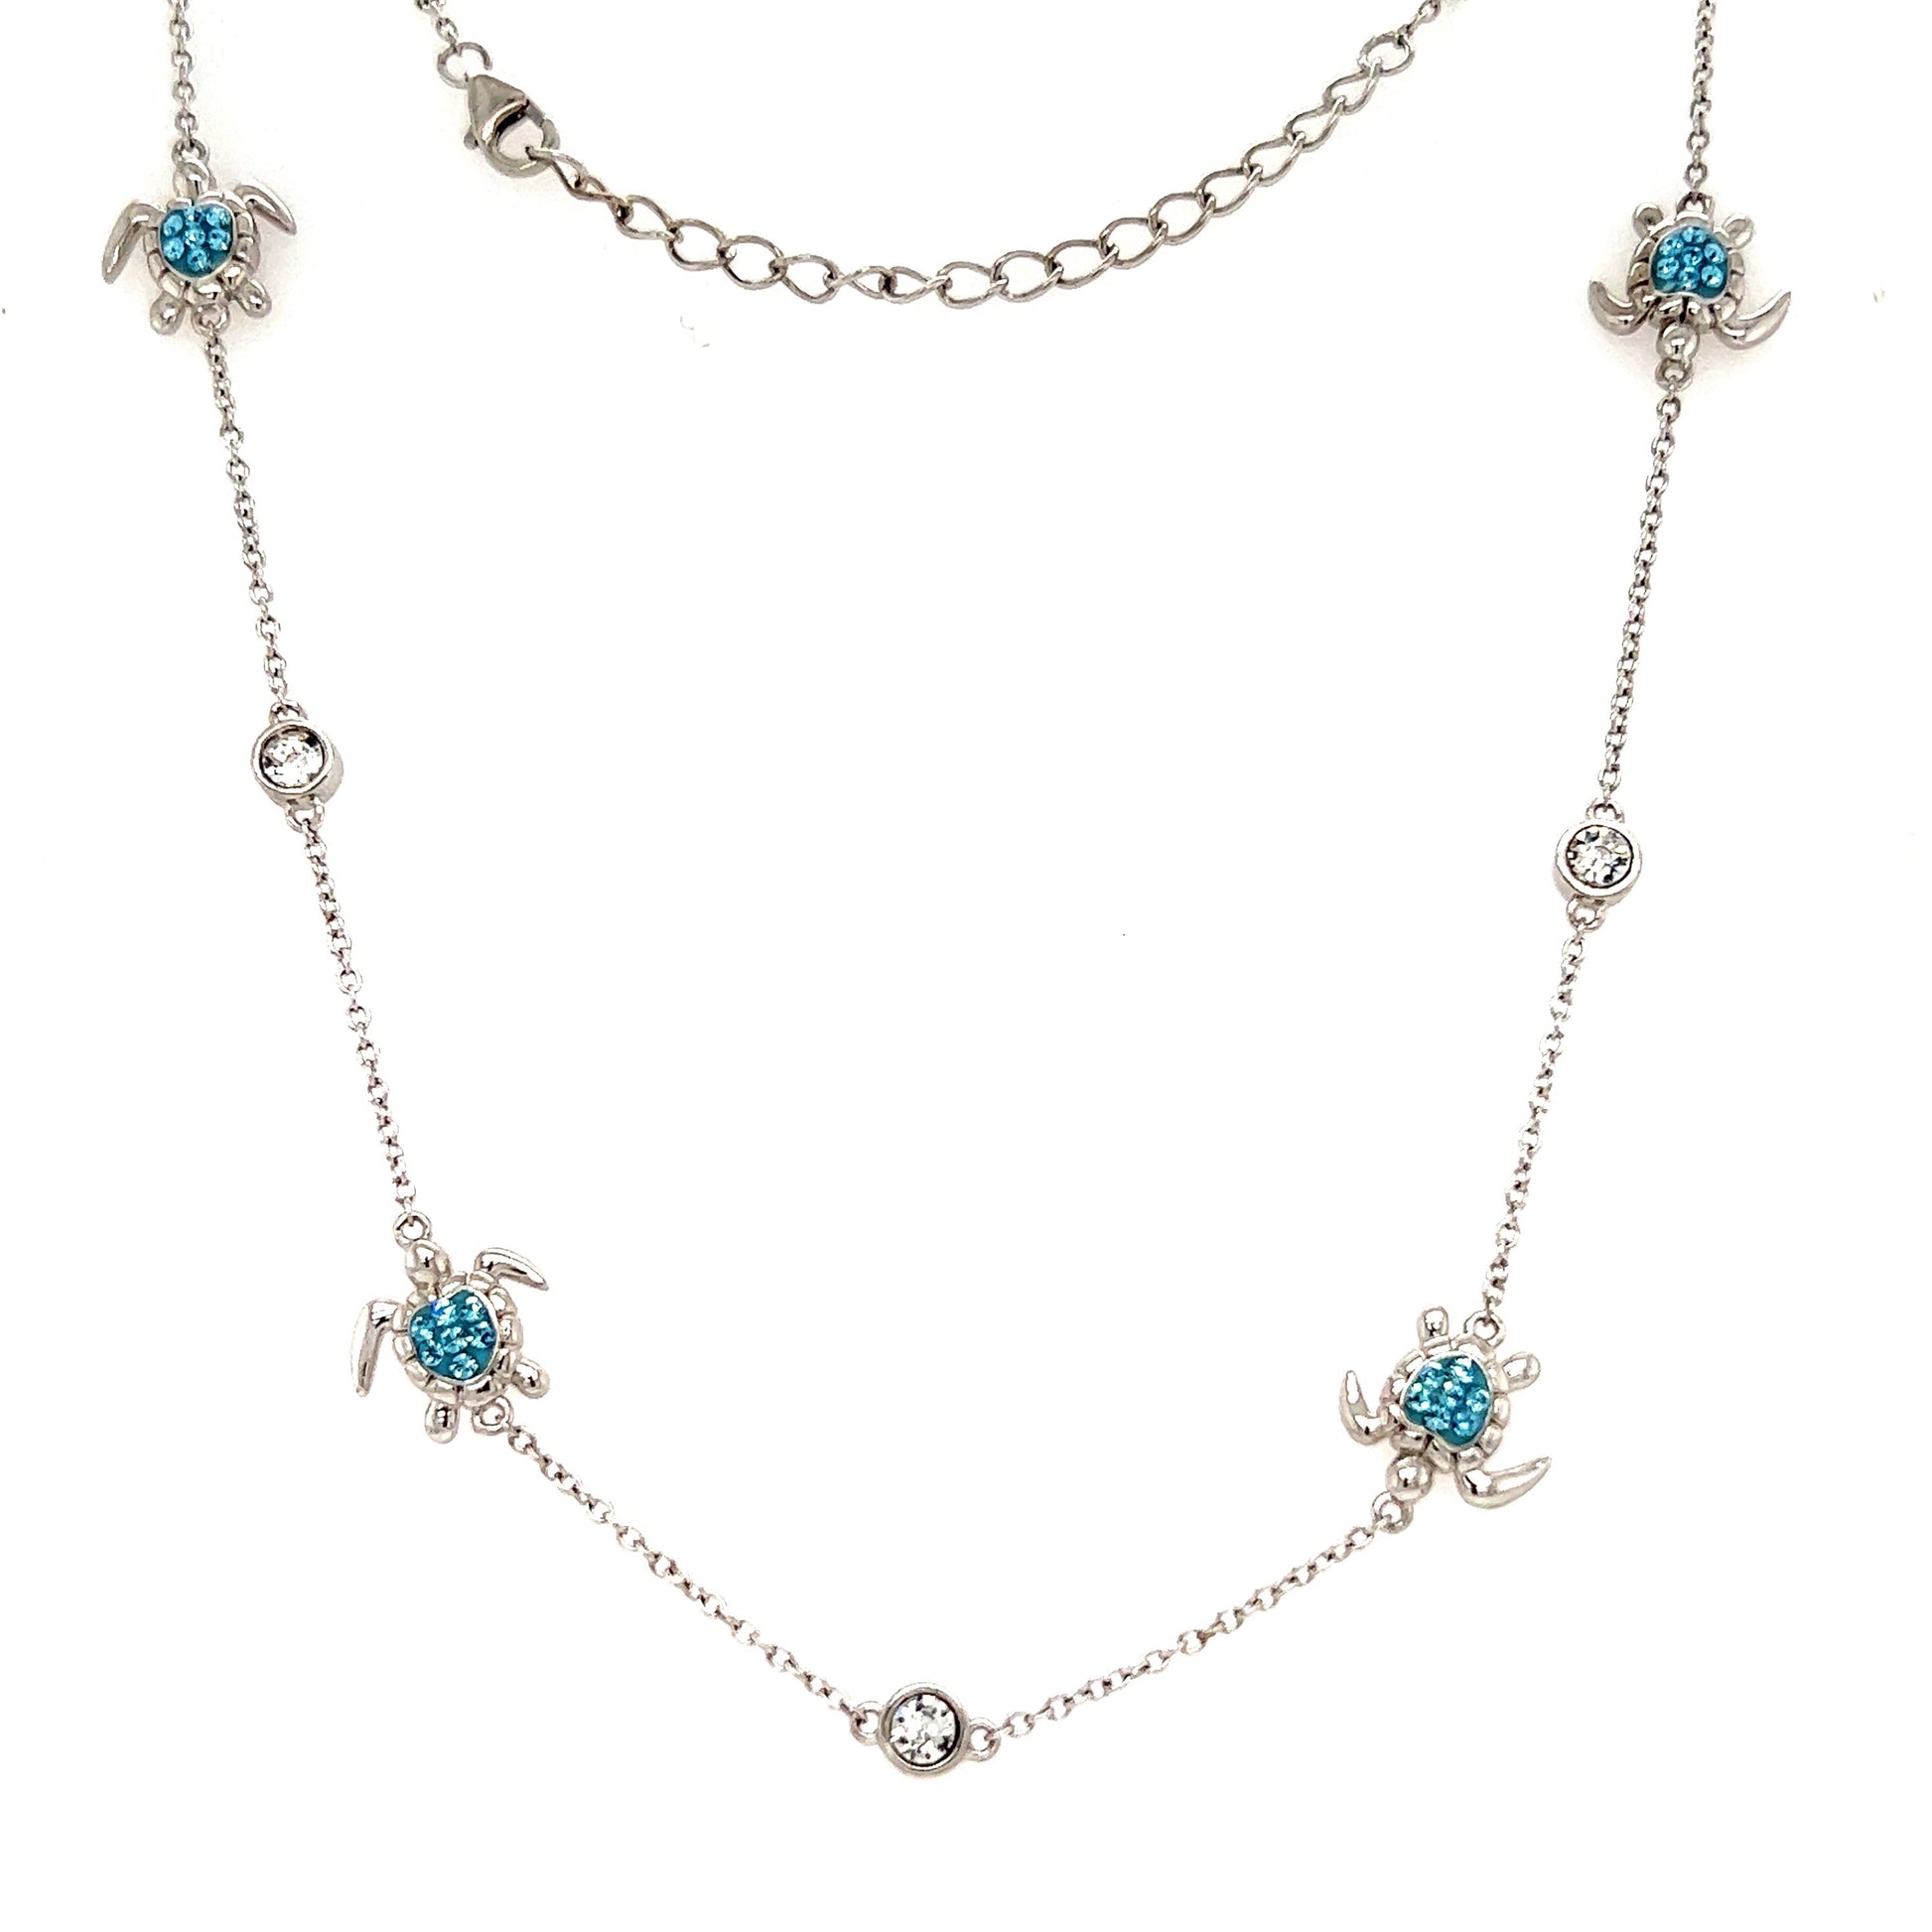 Sea Turtle Necklace with Aqua Crystals in Sterling Silver Full Necklace Front View